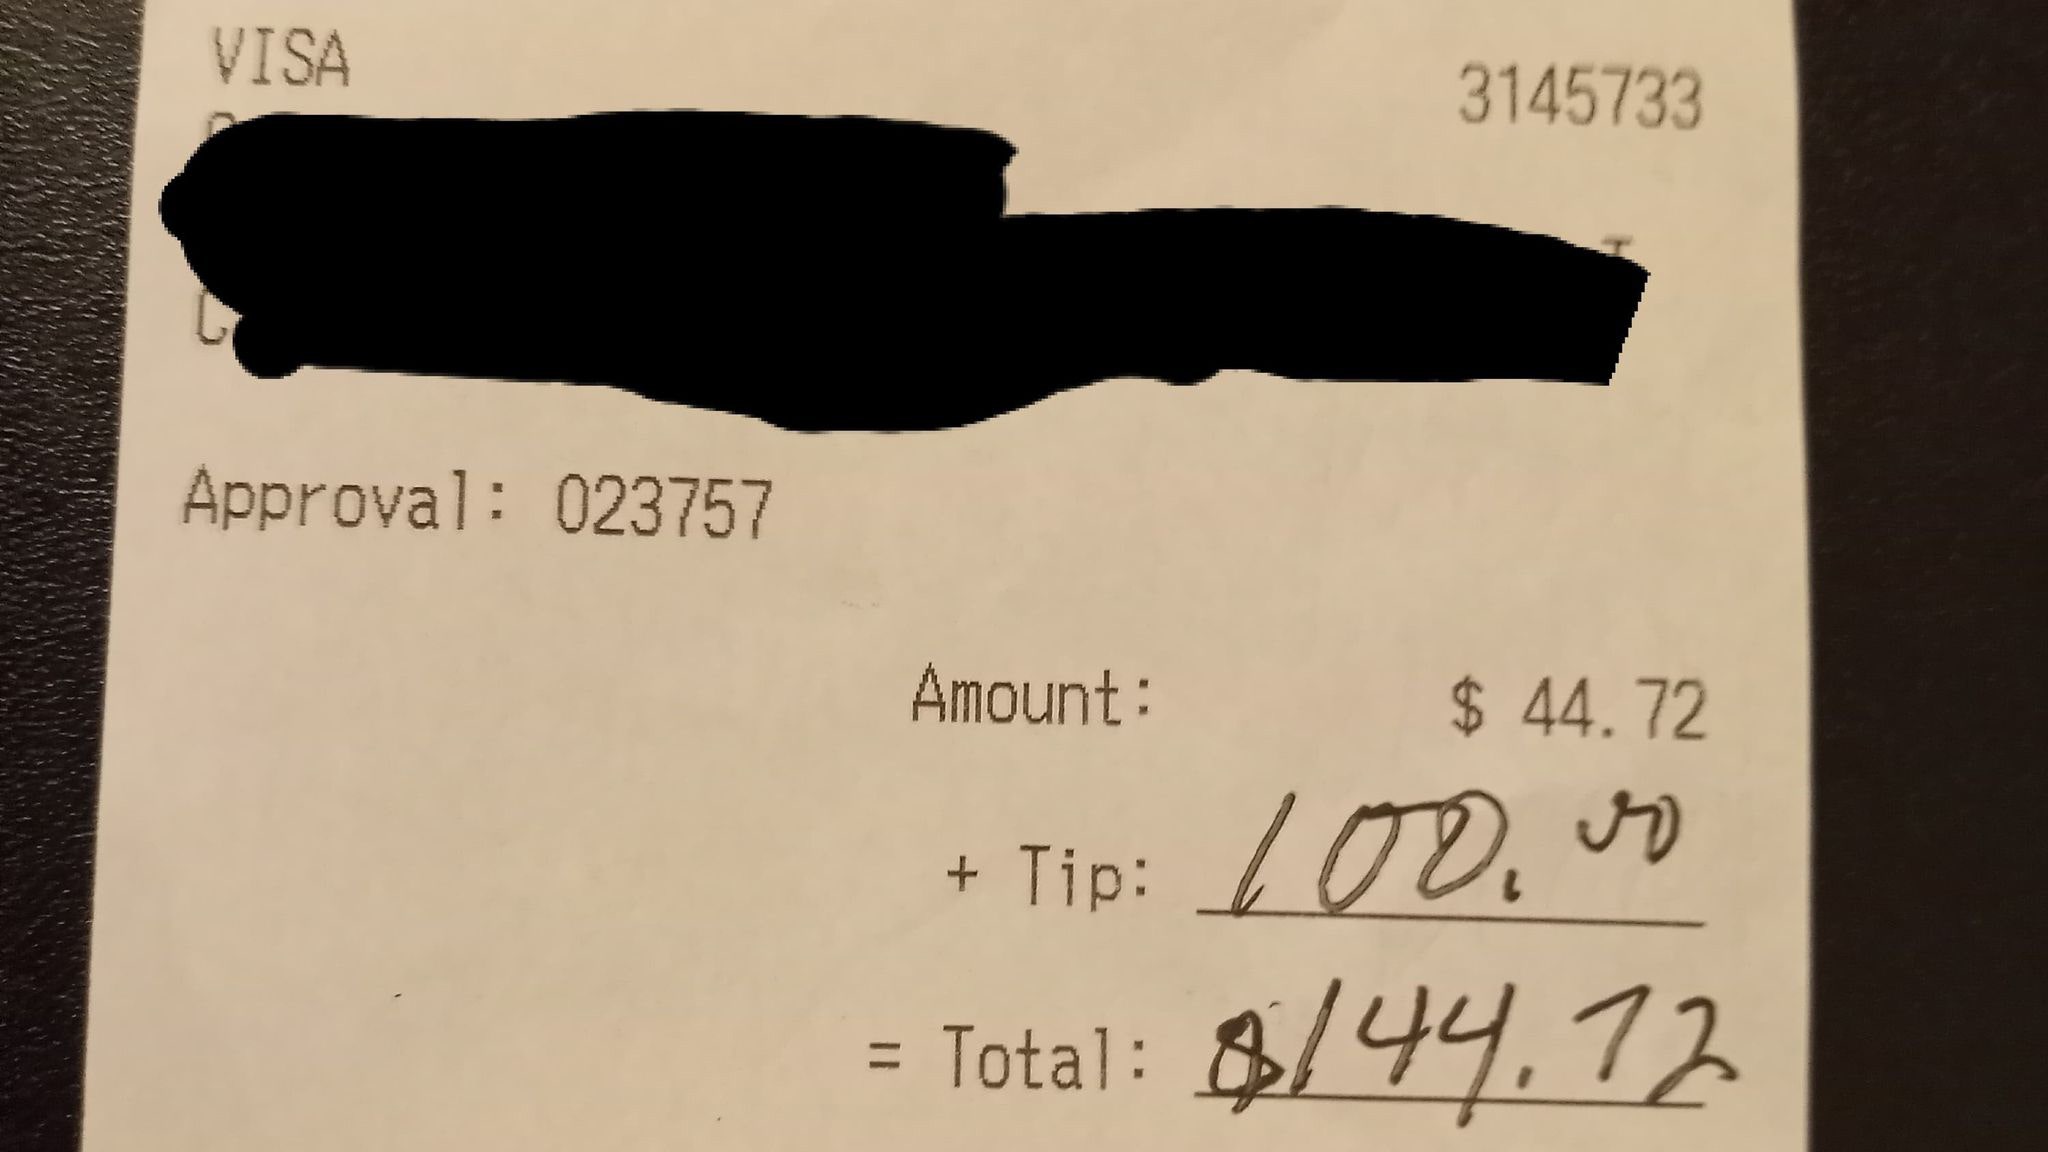 Virginia restaurant server receives generous tips that help her visit dying brother